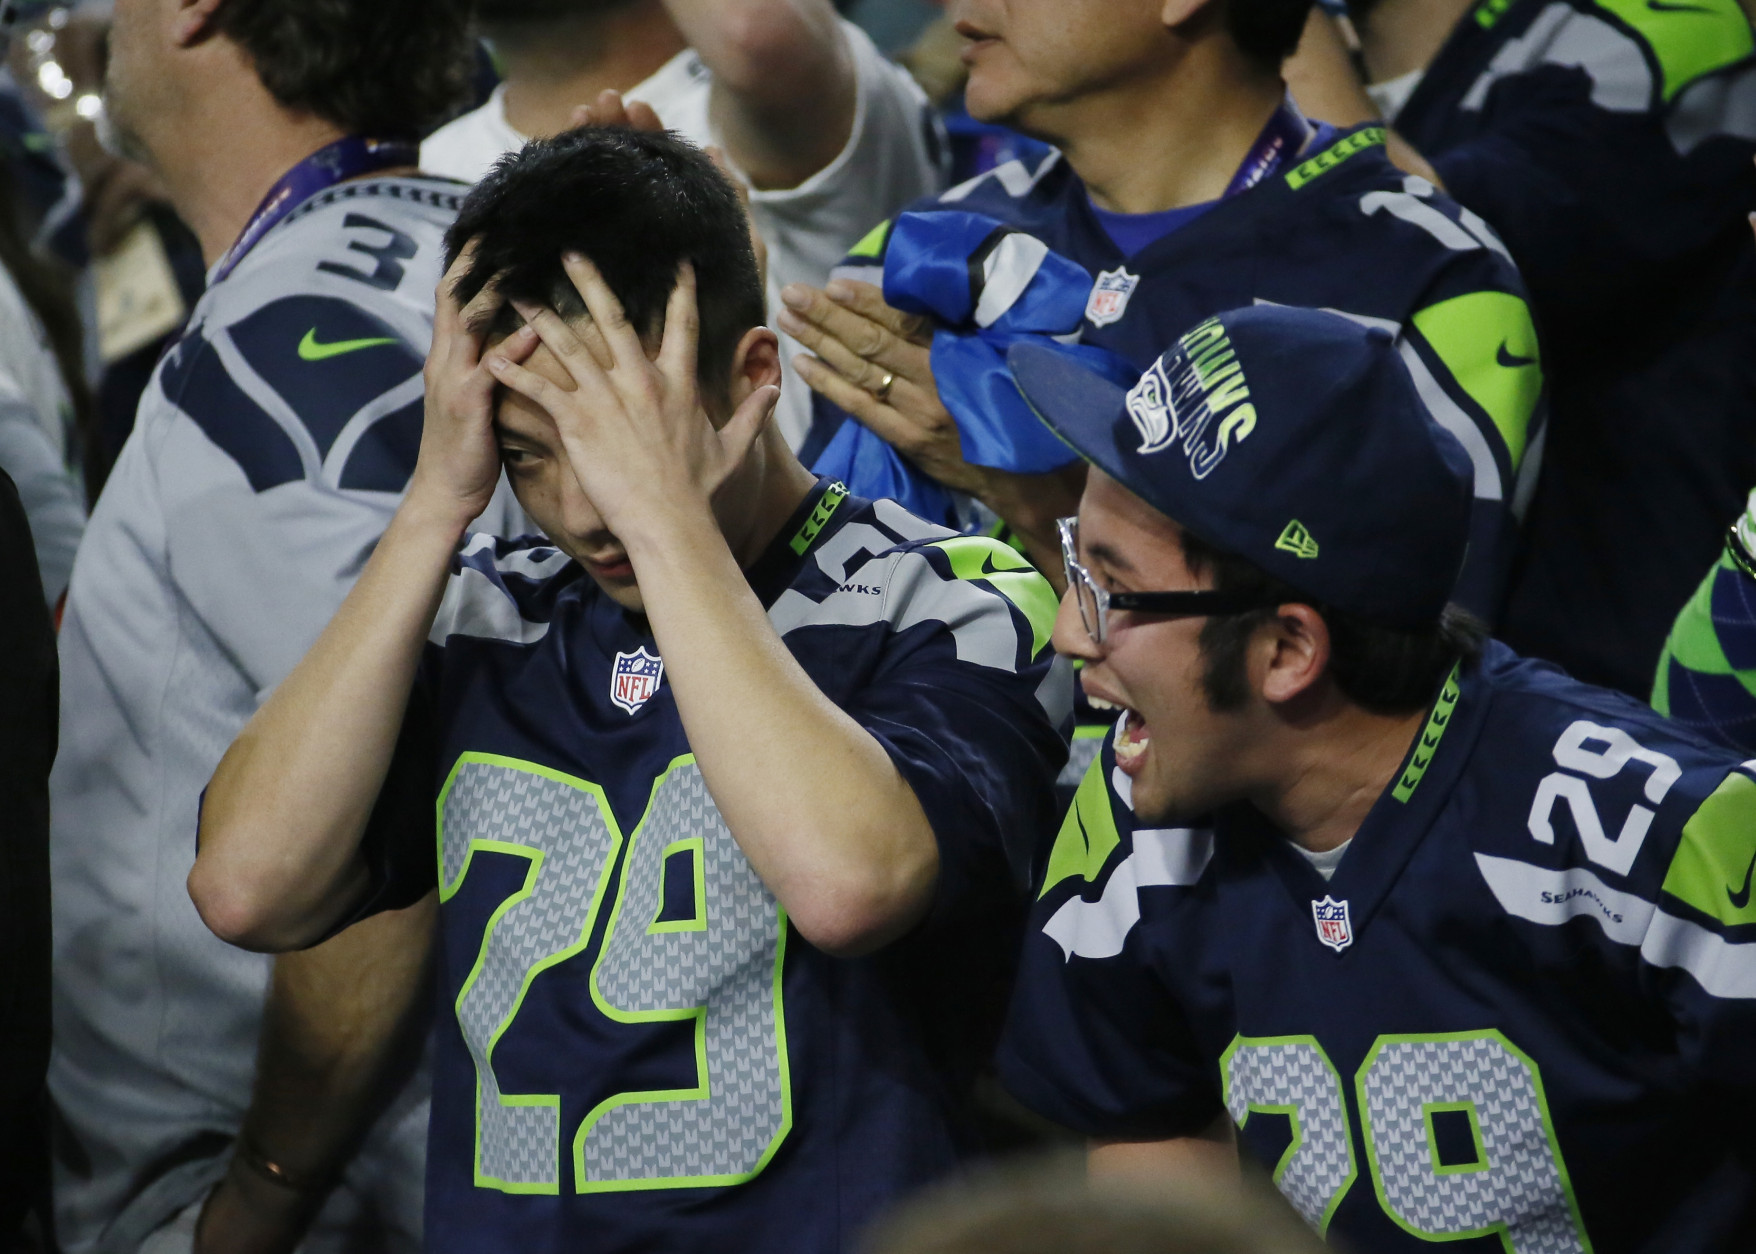 Seattle Seahawks fans react during the second half of the NFL Super Bowl XLIX football game between Seahawks and the New England Patriots Sunday, Feb. 1, 2015, in Glendale, Ariz. (AP Photo/Matt York)